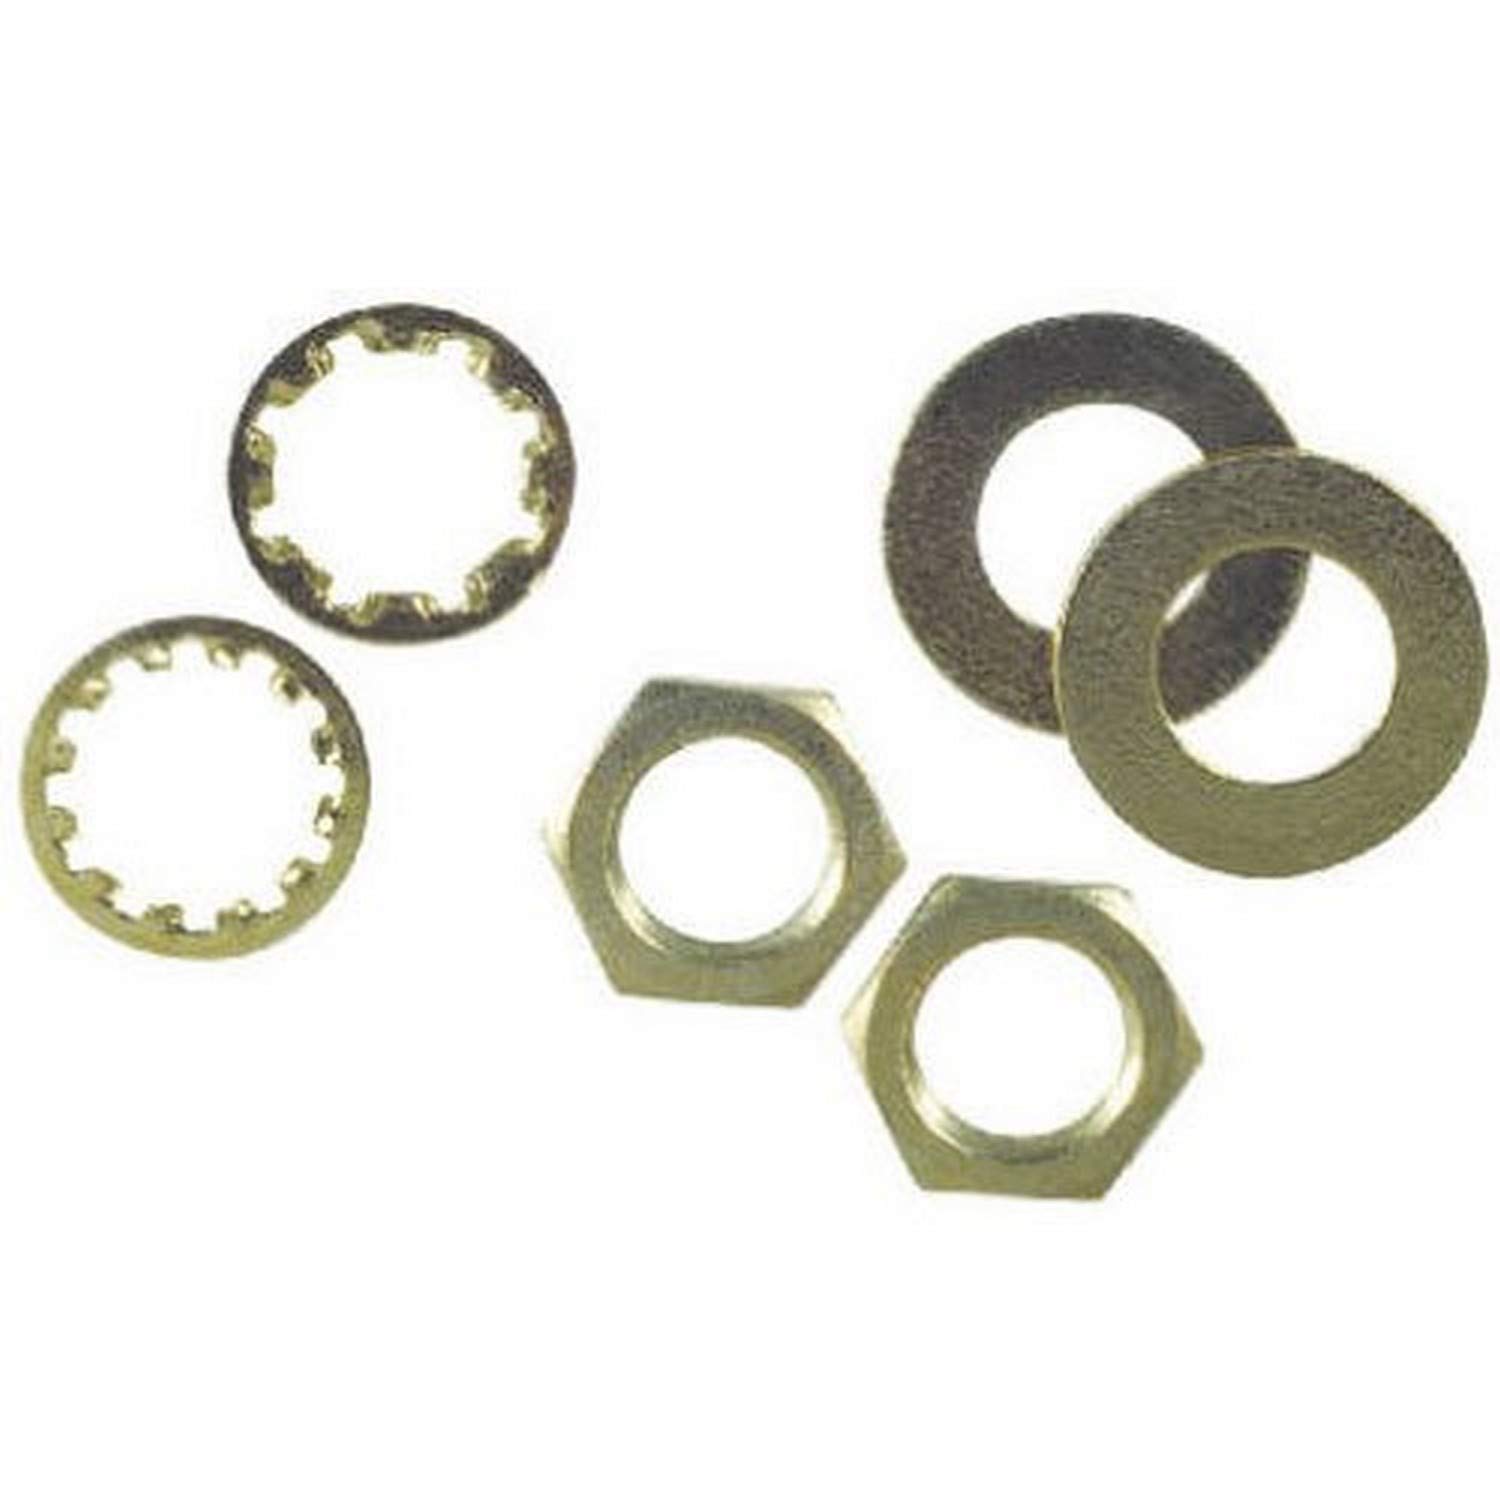 6 Assorted Nuts and Washers Brass-Plated Steel